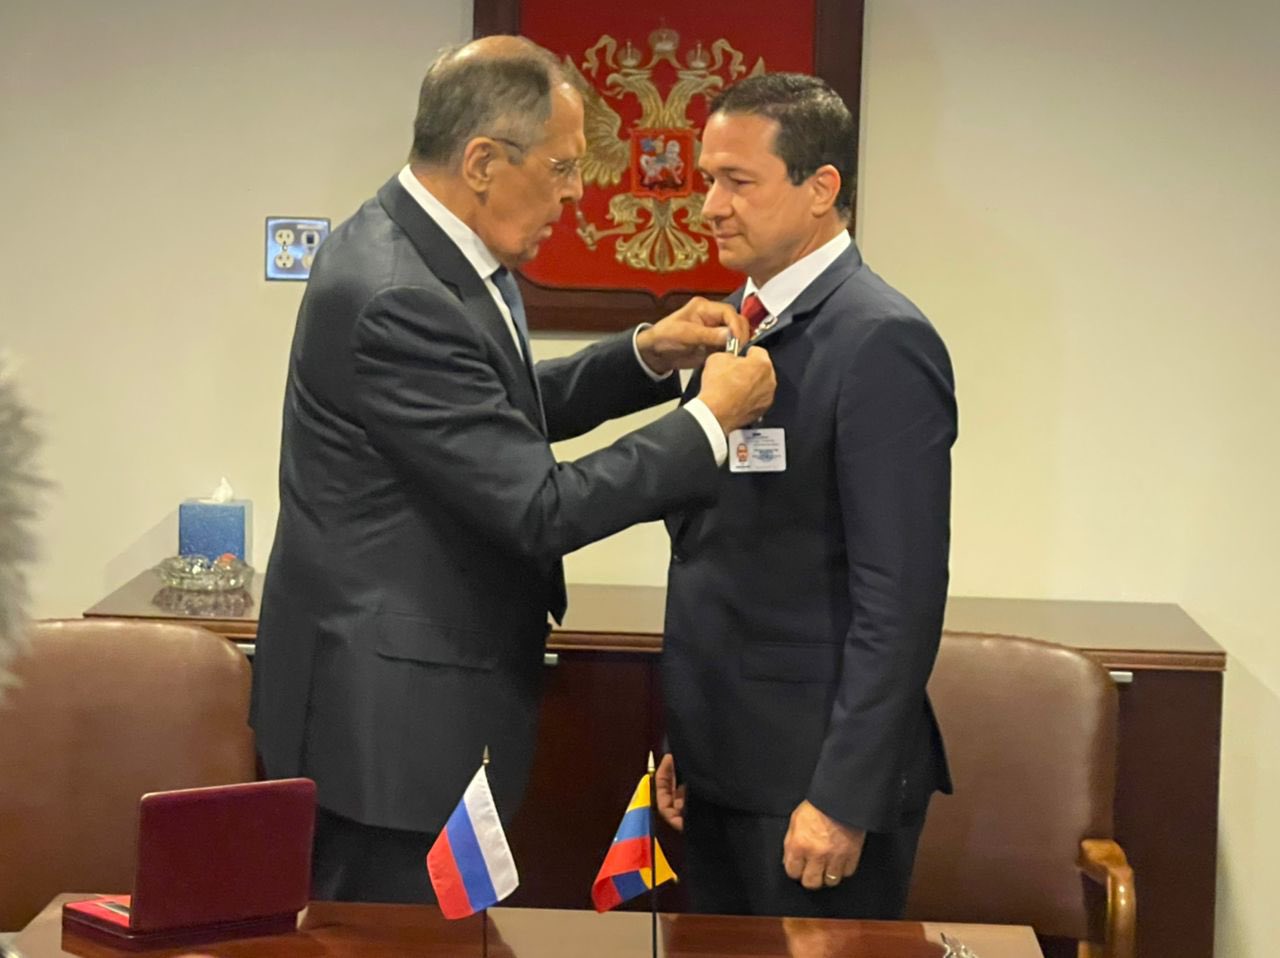 Russian Foreign Minister Sergey Lavrov (left) decorates his Venezuelan counterpart Carlos Faria (right) with the Order of Friendship in New York during UN General Assembly activities, September 21, 2022. Photo: Twitter/@Fariacrt.